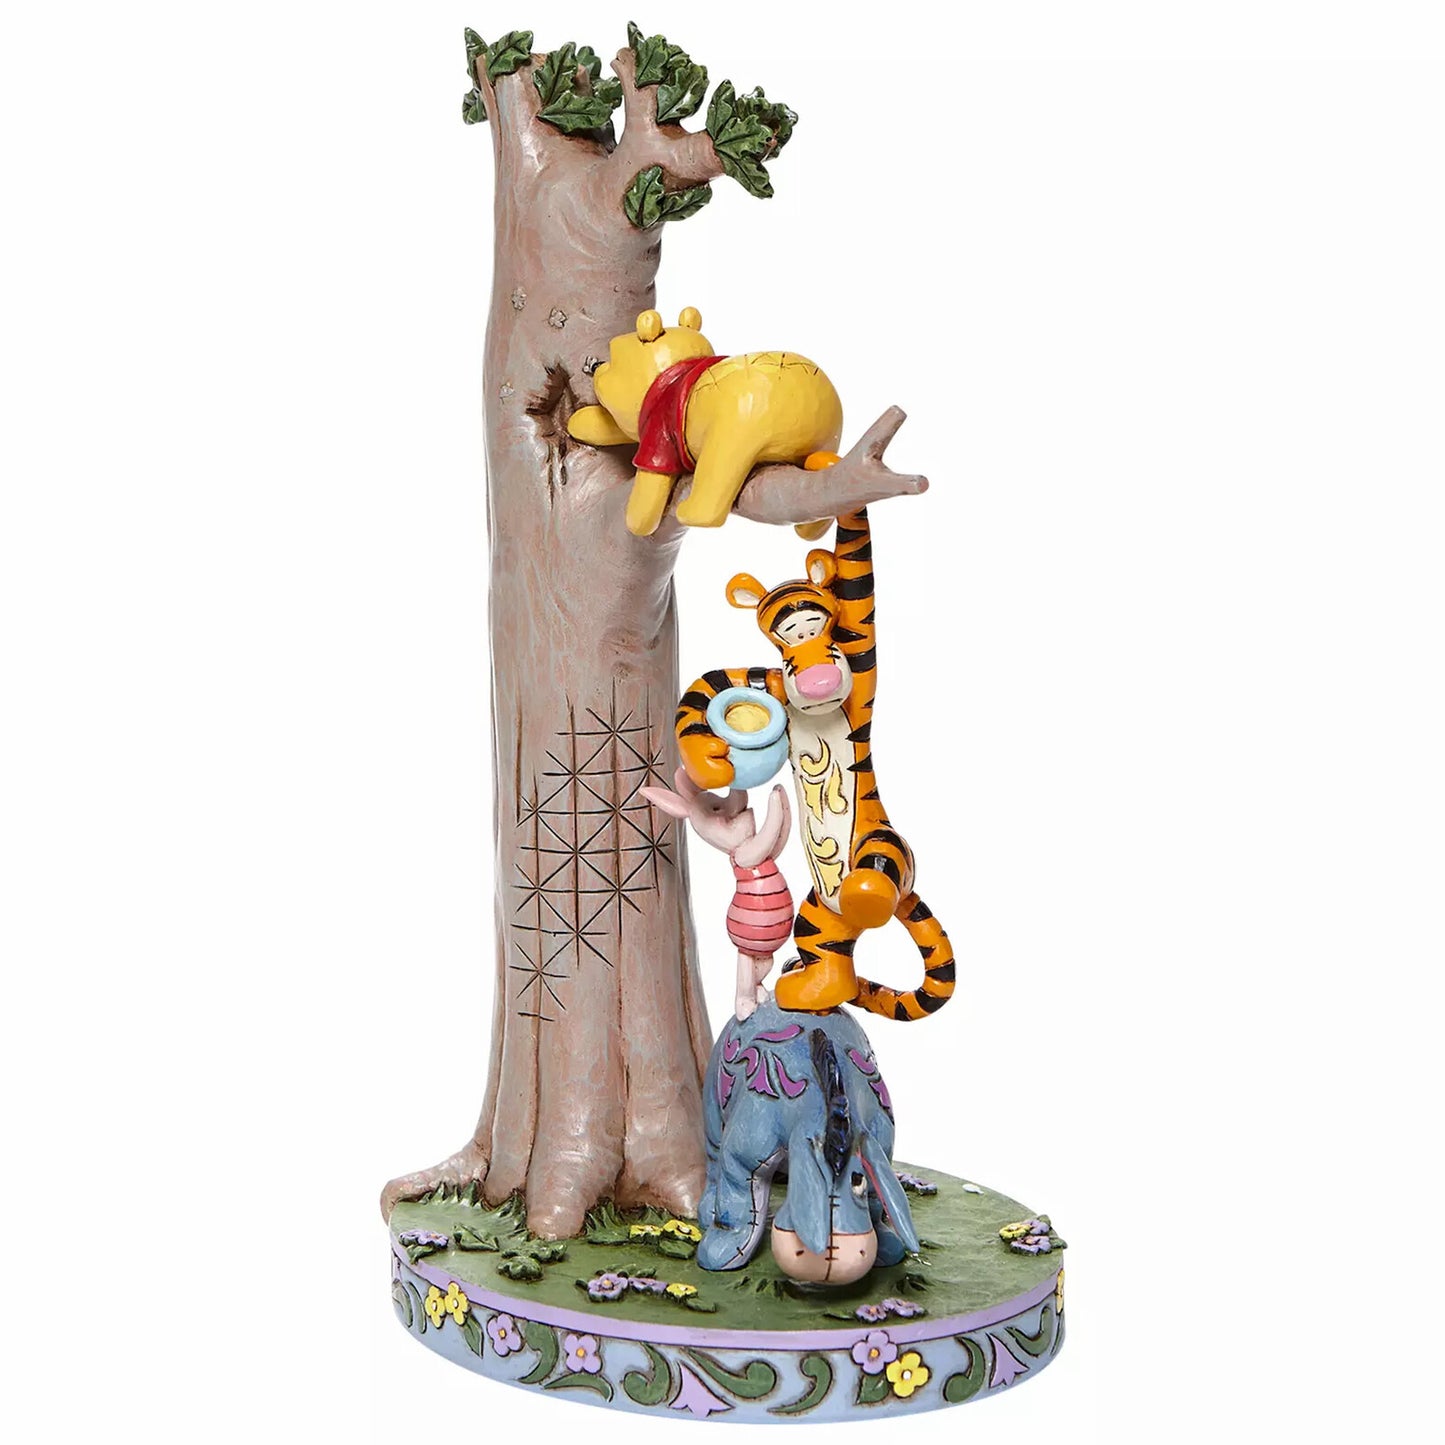 DISNEY TRADITIONS WINNIE THE POOH TIGGER AND PIGLET IN A TREE FIGURINE - Gifts R Us